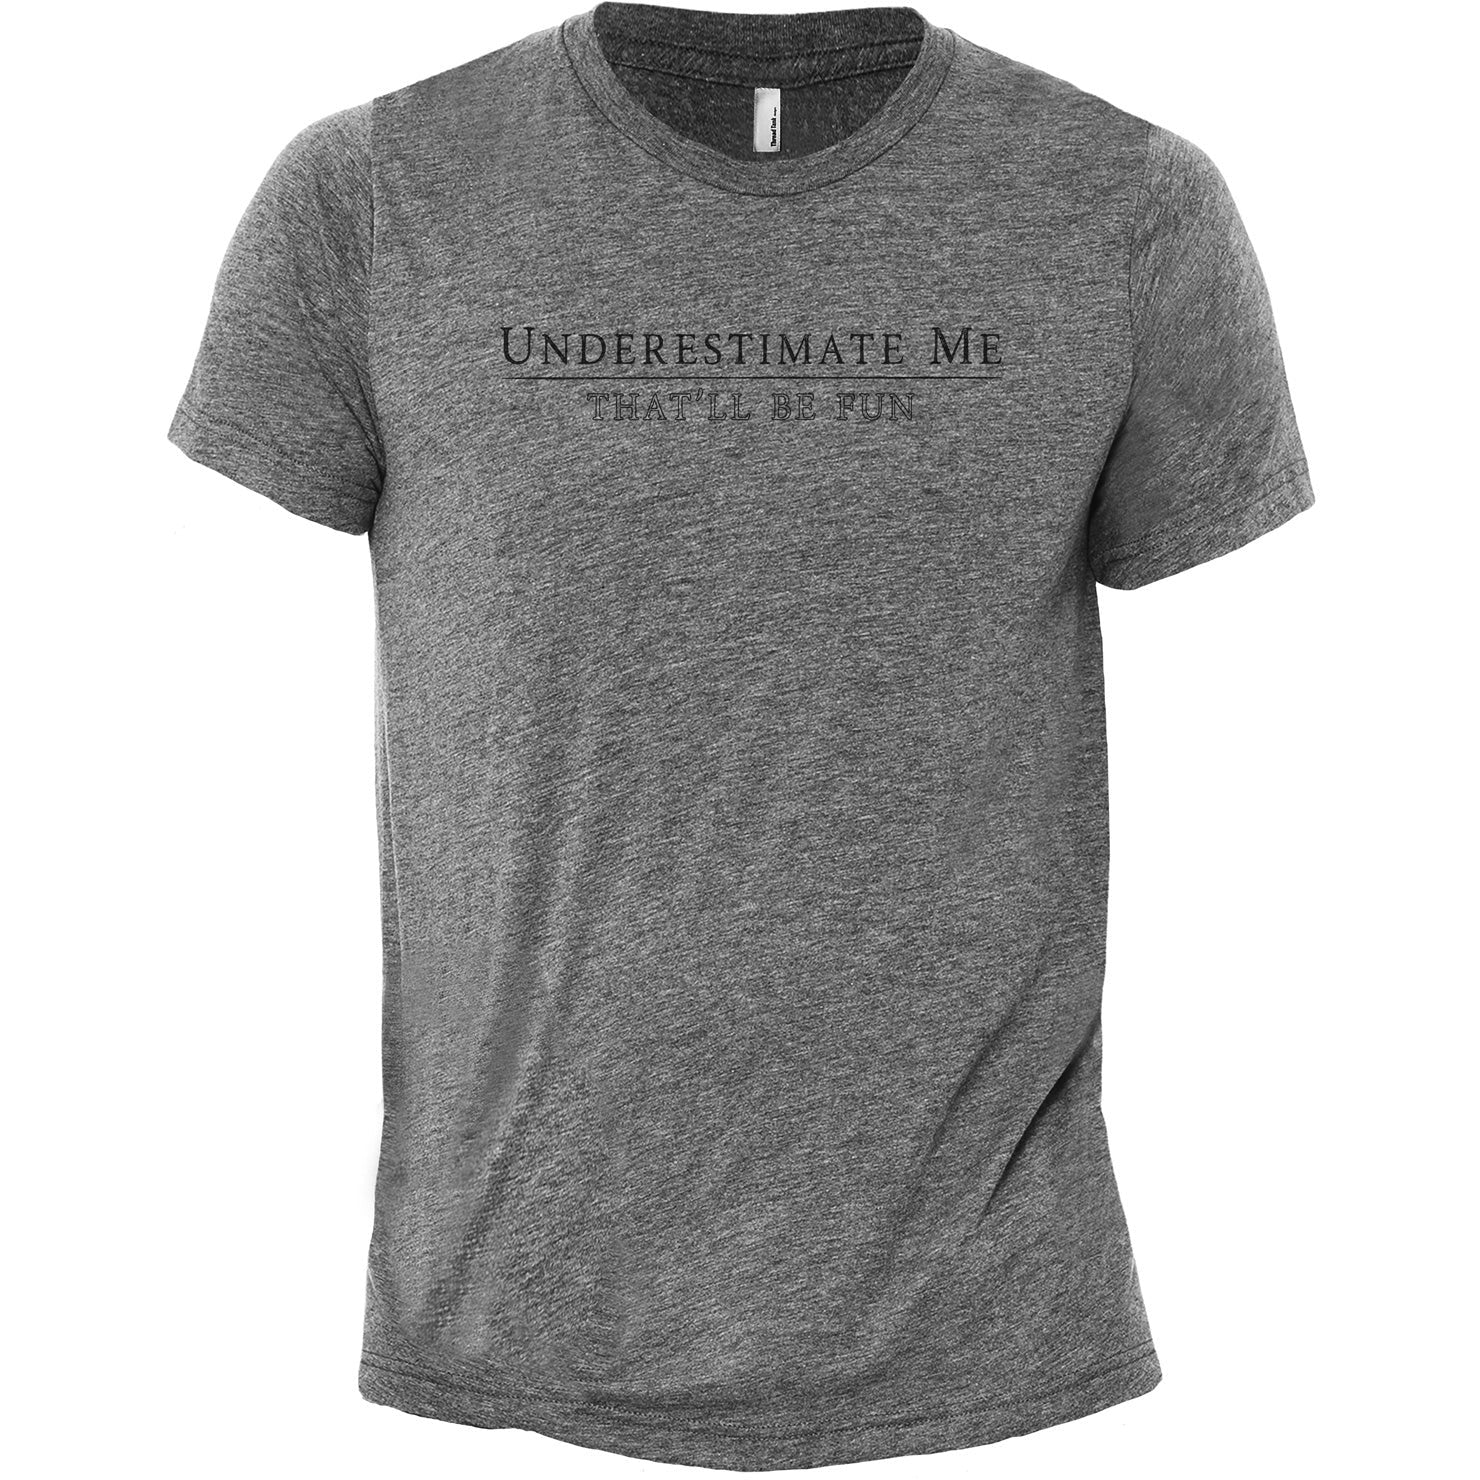 Underestimate Me - That'll Be Fun - Stories You Can Wear